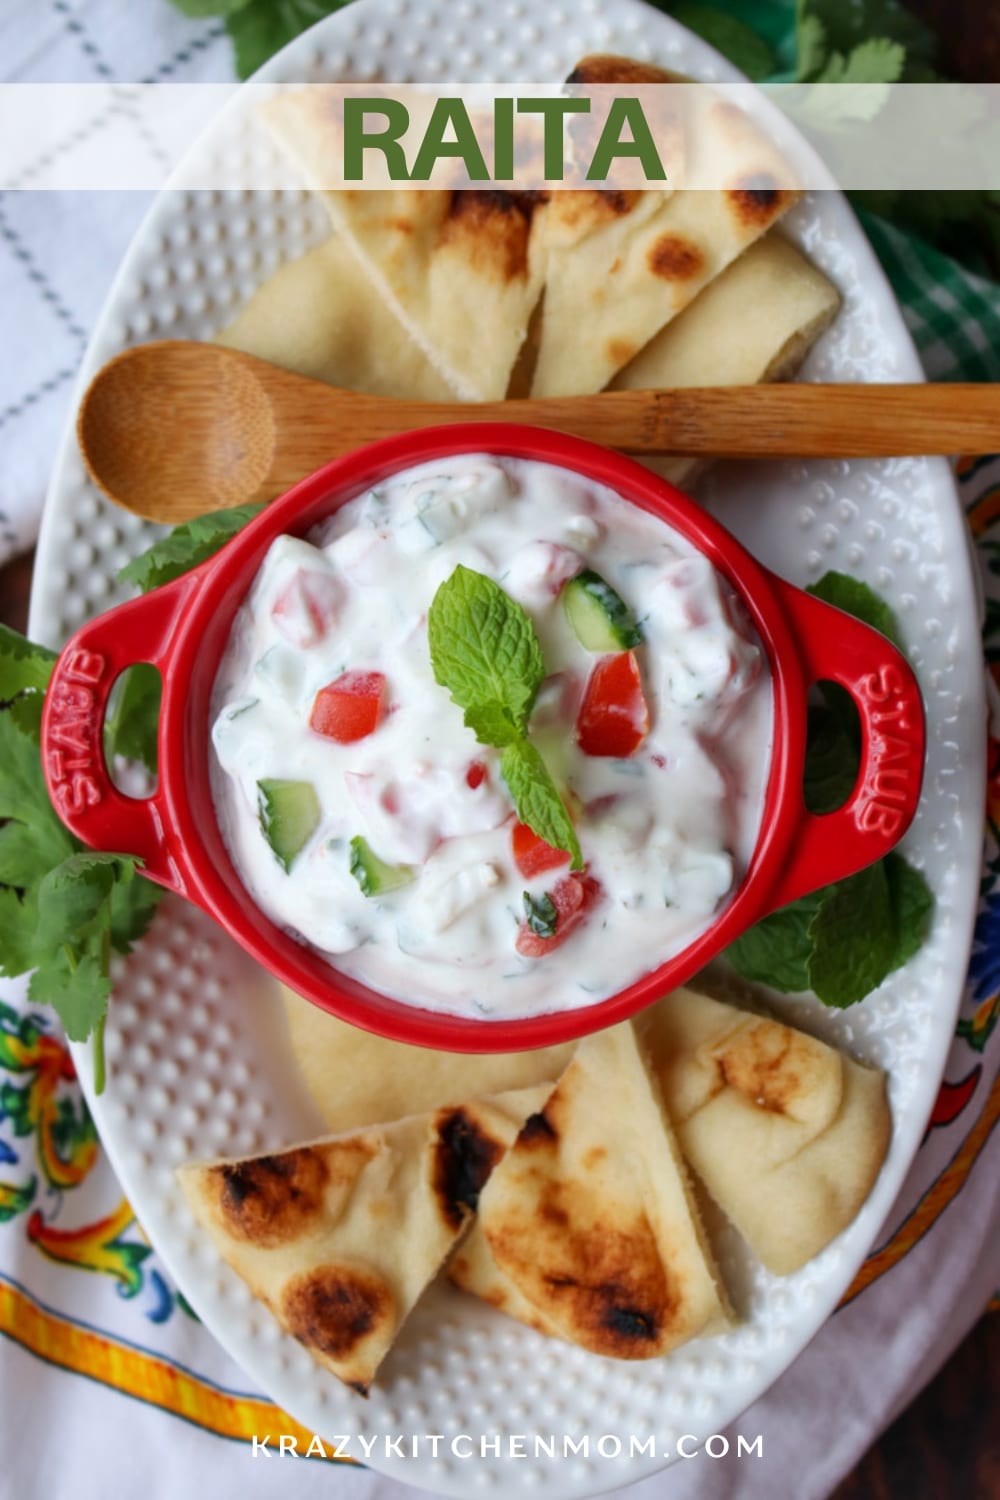 A creamy cool Indian yogurt-based dipping sauce that pairs perfectly with grilled pita bread, fresh veggies dipper, and spicy foods. via @krazykitchenmom